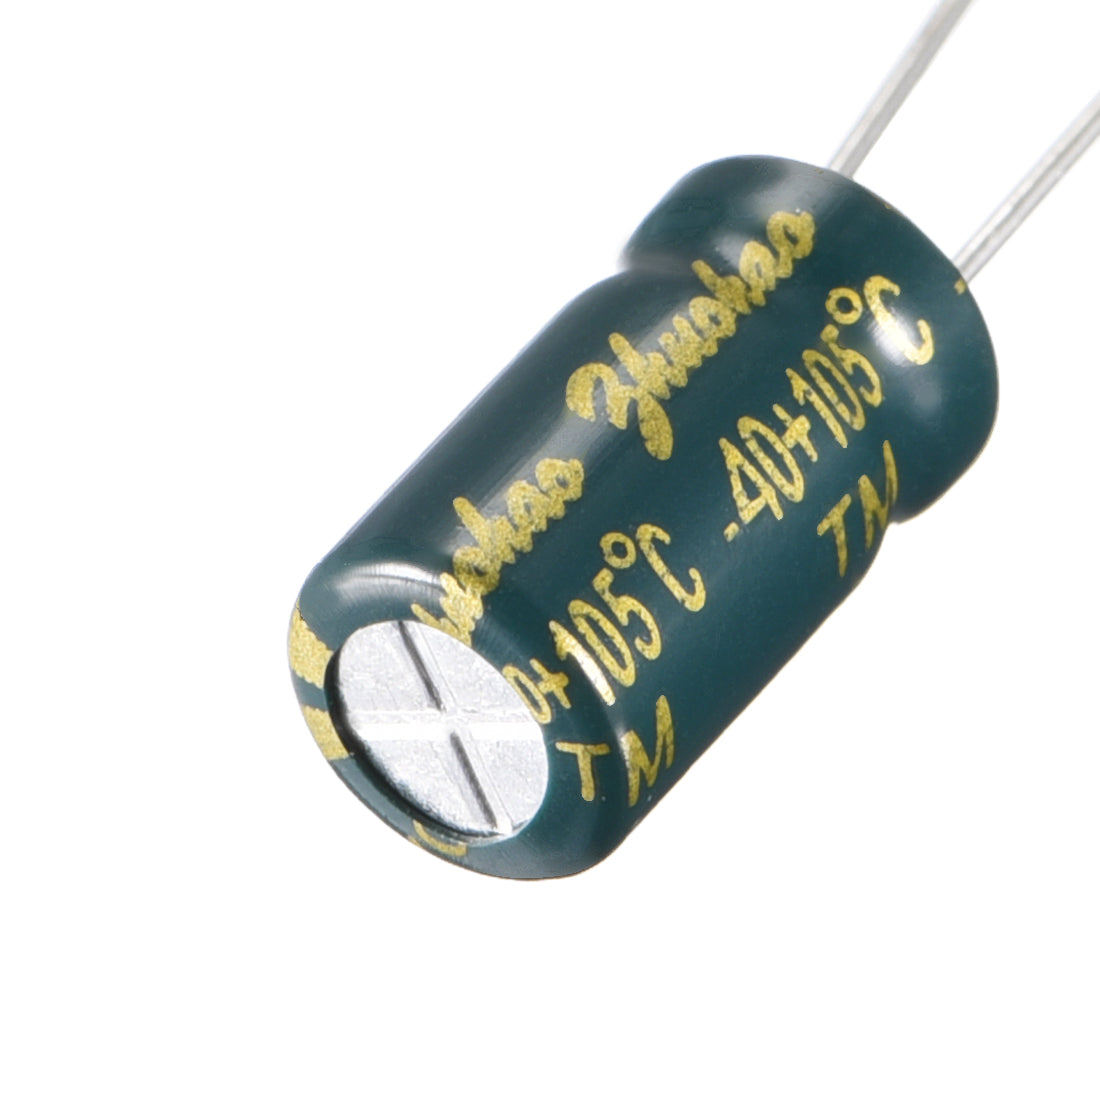 uxcell Uxcell Aluminum Radial Electrolytic Capacitor Low ESR Green with 100UF 25V 105 Celsius Life 3000H 6 x 12 mm High Ripple Current,Low Impedance 60pcs